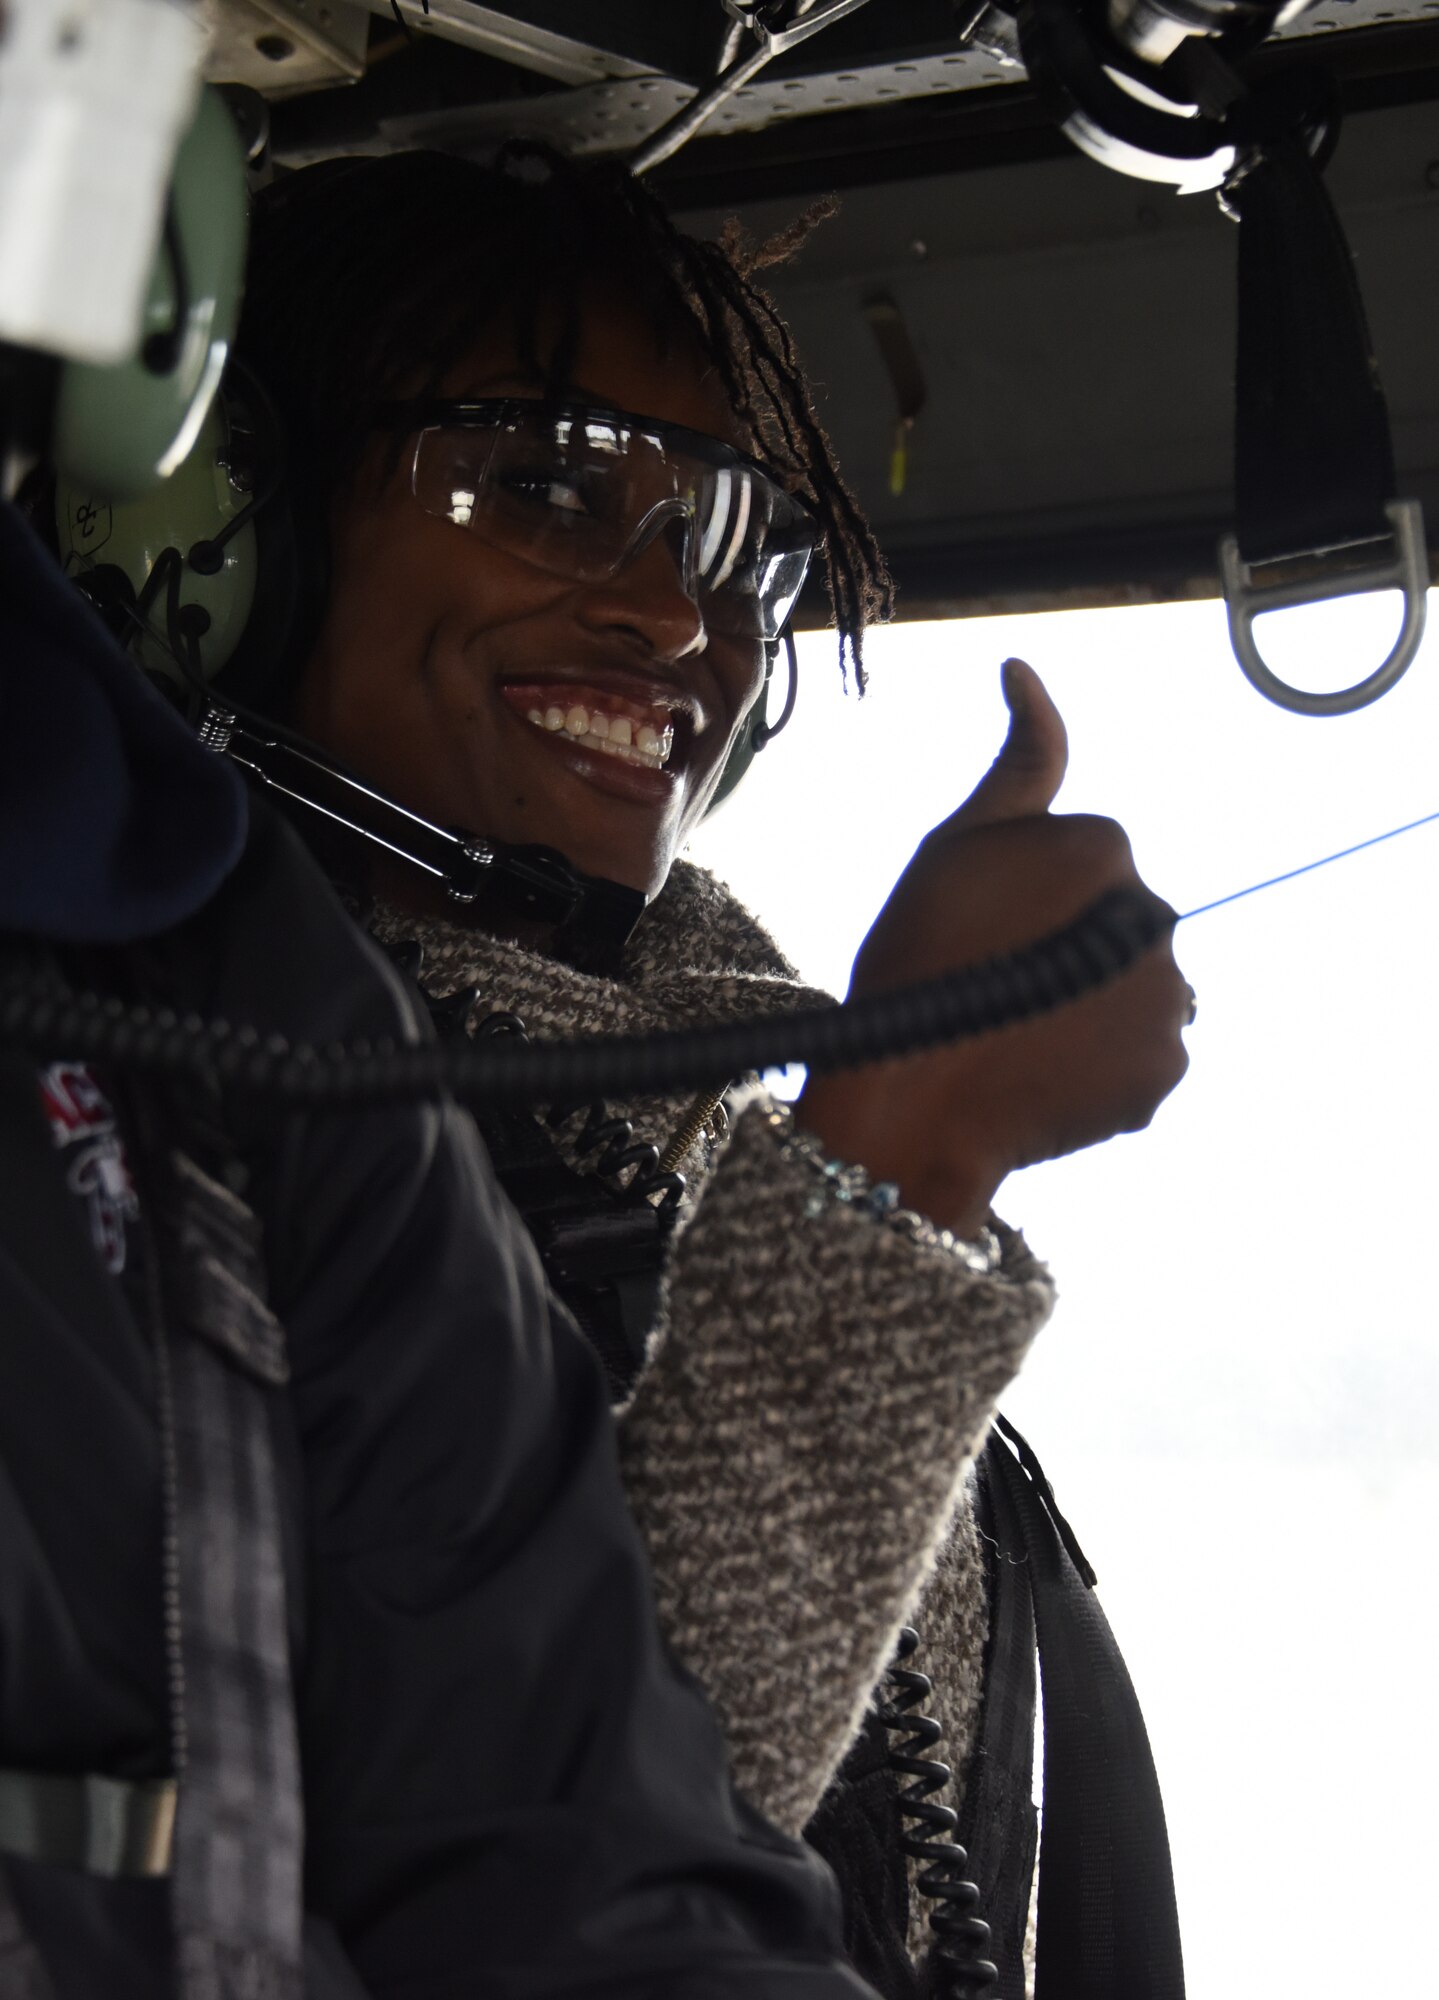 Andrija Dandridge, a watch commander with U.S. Customs and Border Protection, gives a thumbs up sign inside an HH-60G Pave Hawk helicopter before takeoff at Francis S. Gabreski Air National Guard Base, N.Y., Oct. 13, 2018.